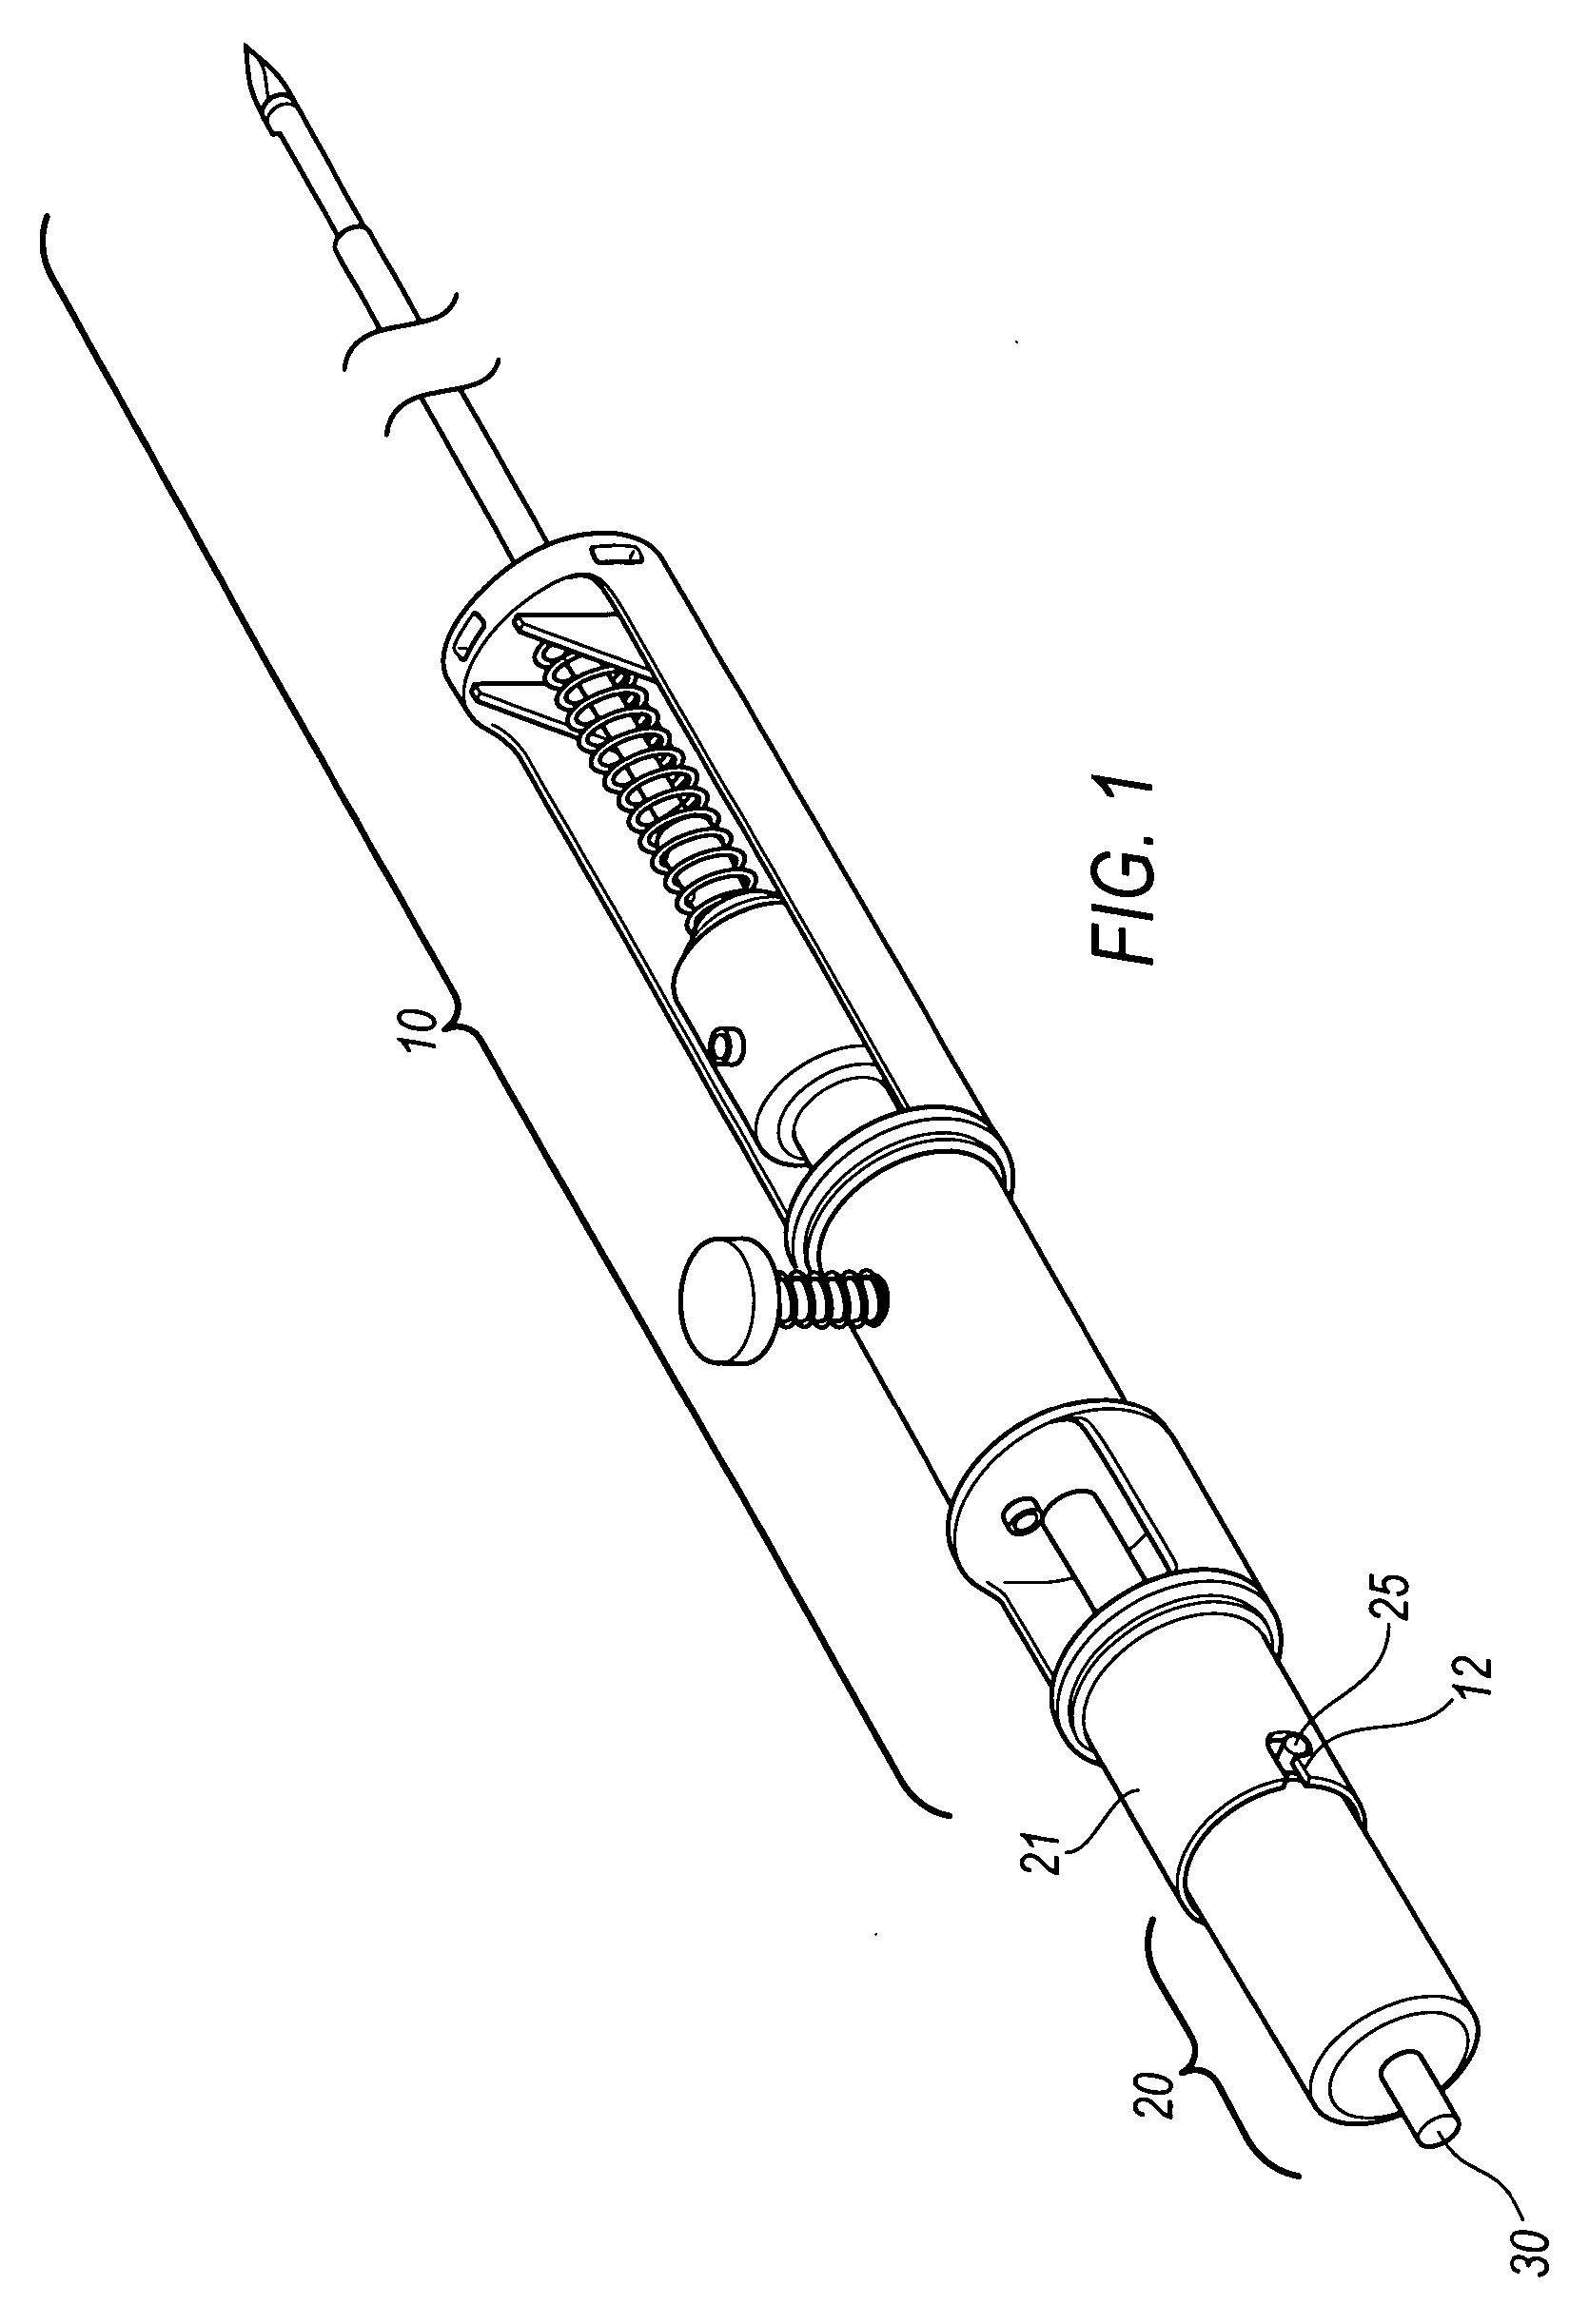 Selectively openable tissue filter